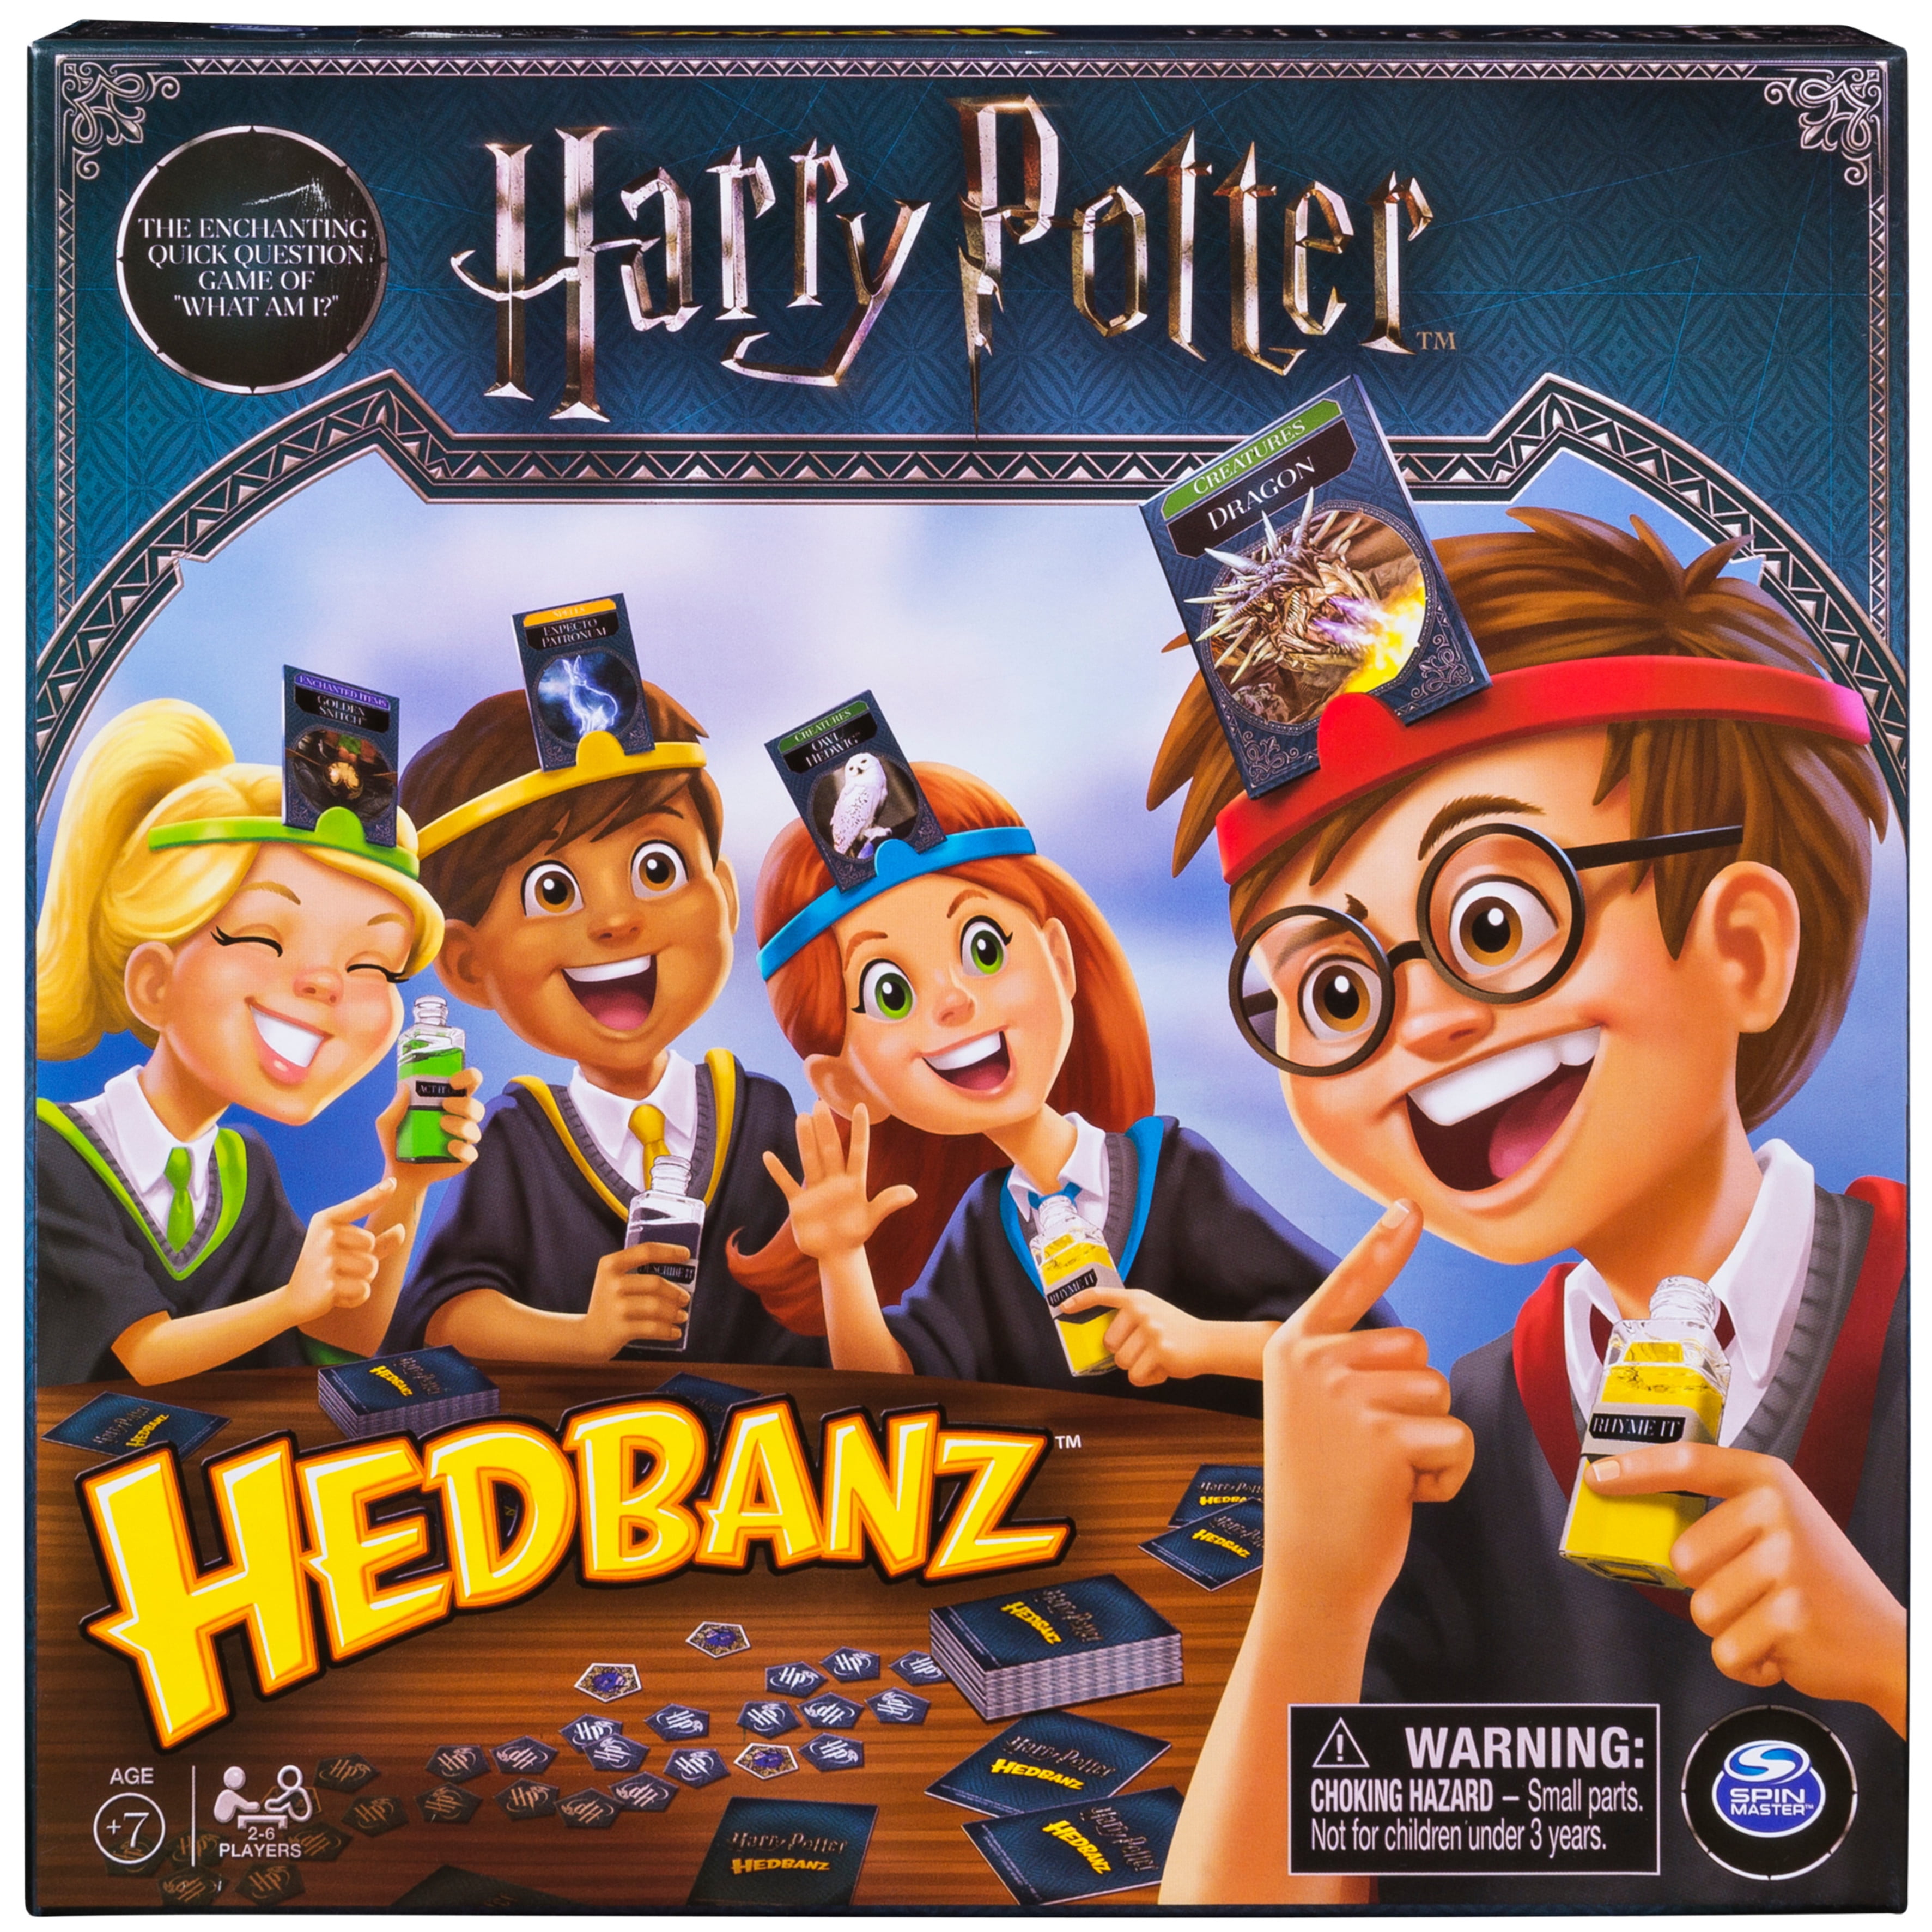 Pictionary AirHarry Potter EditionFun Family Party Game 